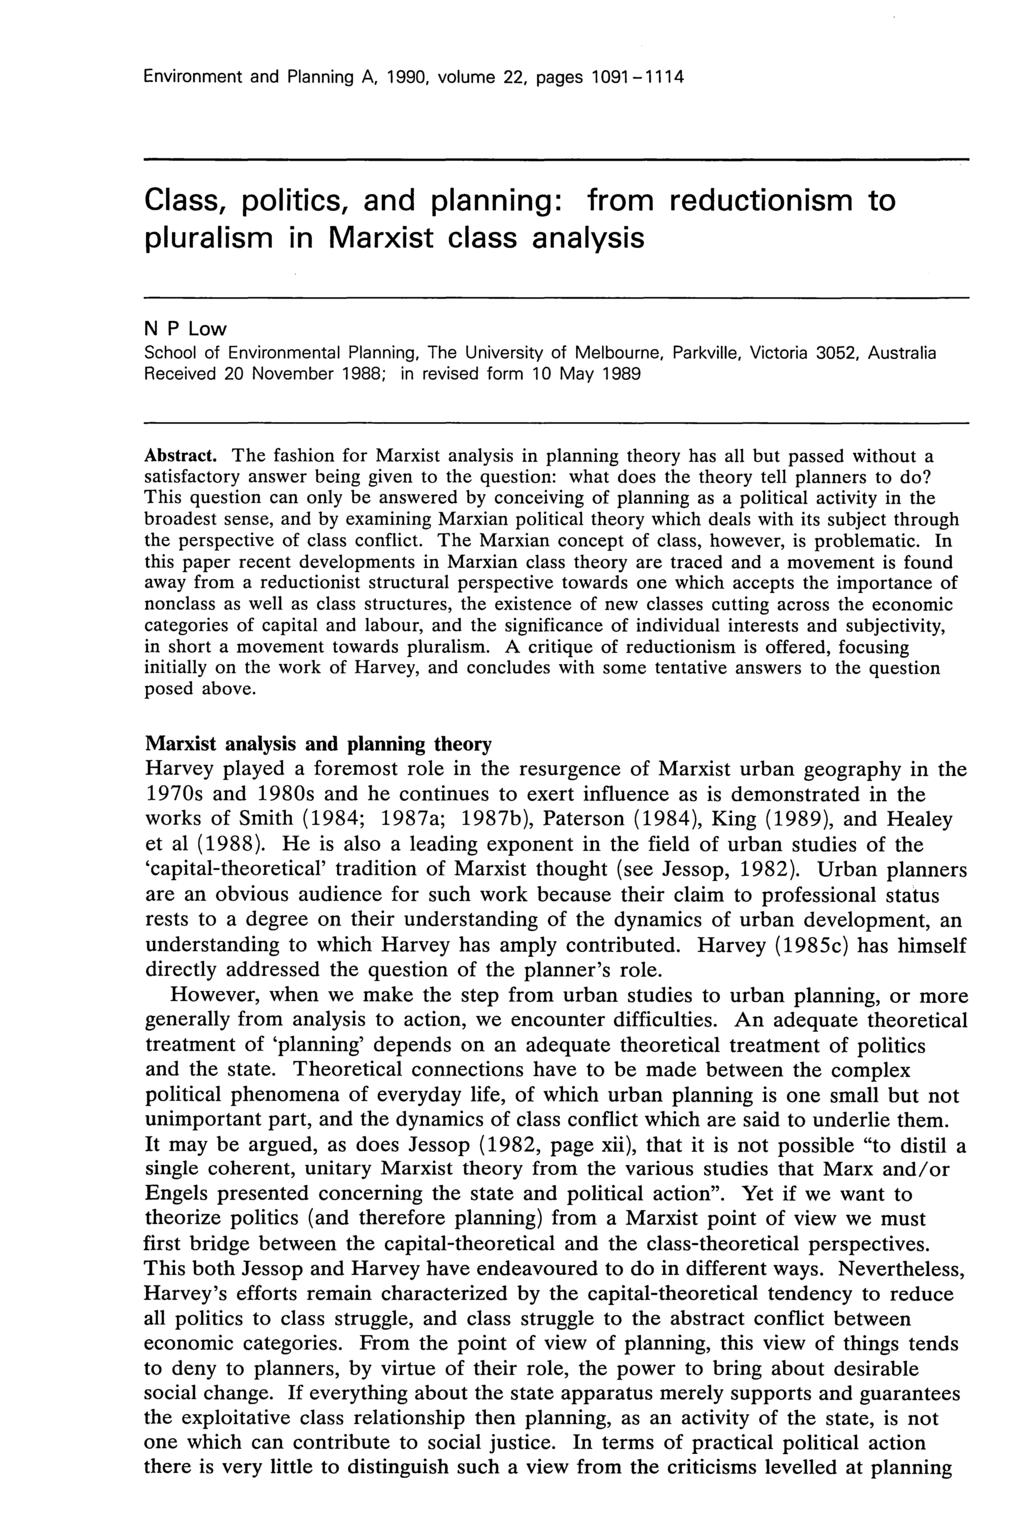 Environment and Planning A, 1990, volume 22, pages 1091-1114 Class, politics, and planning: from reductionism to pluralism in Marxist class analysis N P Low School of Environmental Planning, The